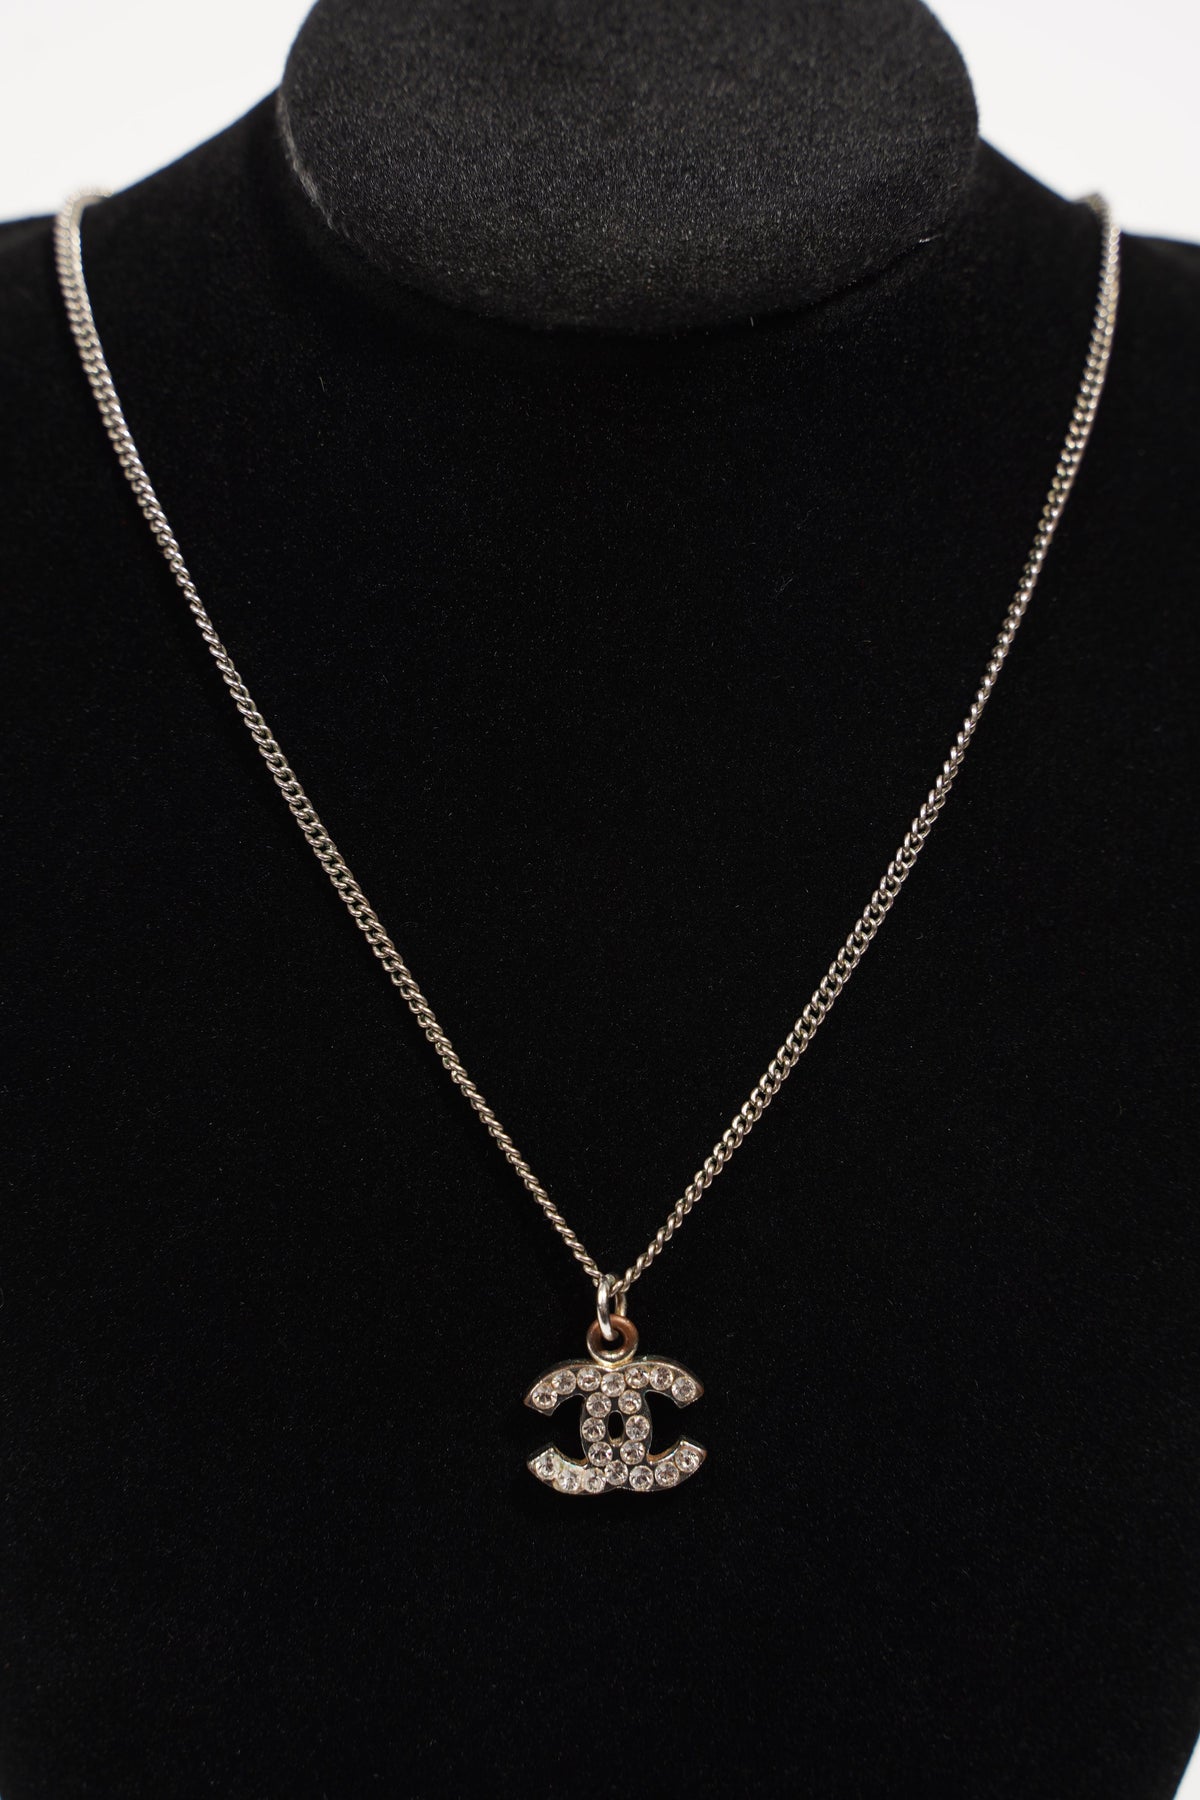 Cheap chanel necklace logo price big sale  OFF 70